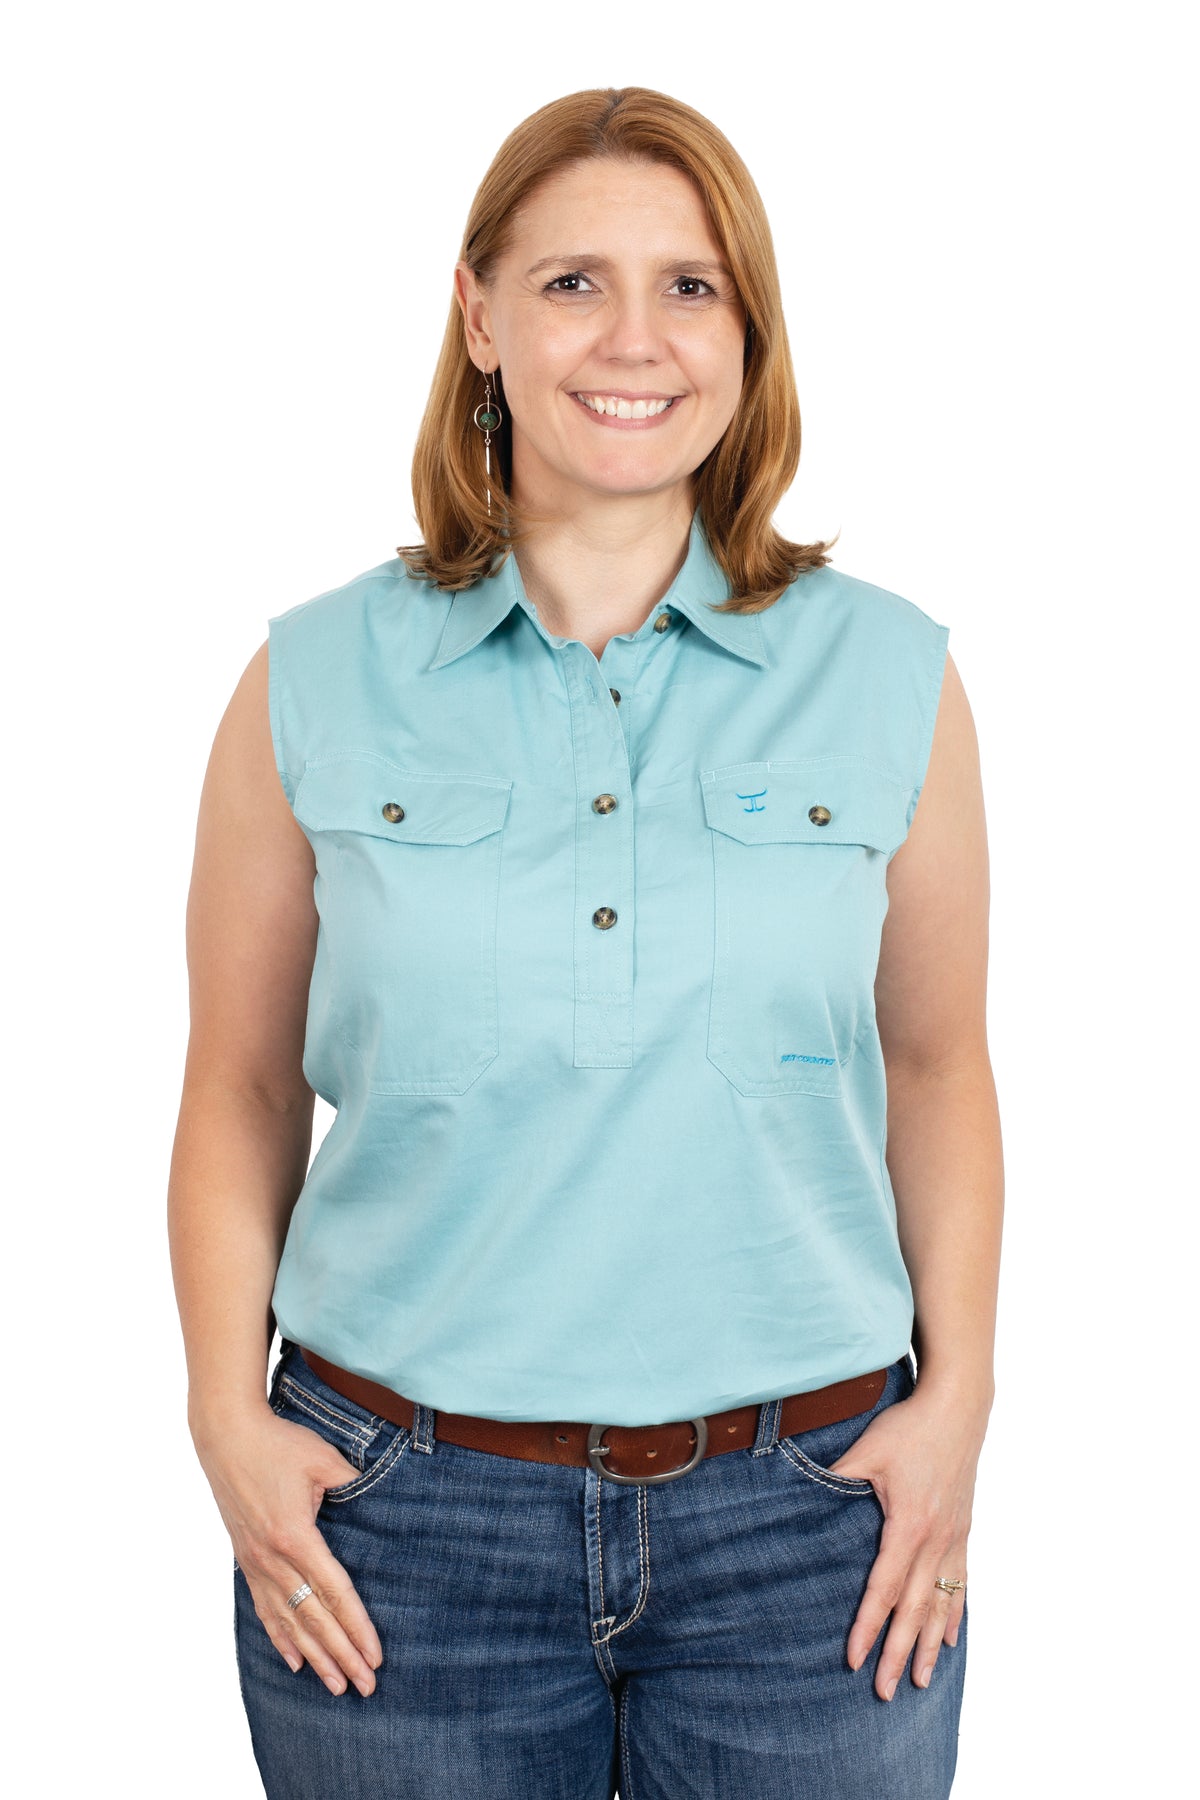 Just Country Womens Kerry Sleeveless Workshirt - Reef